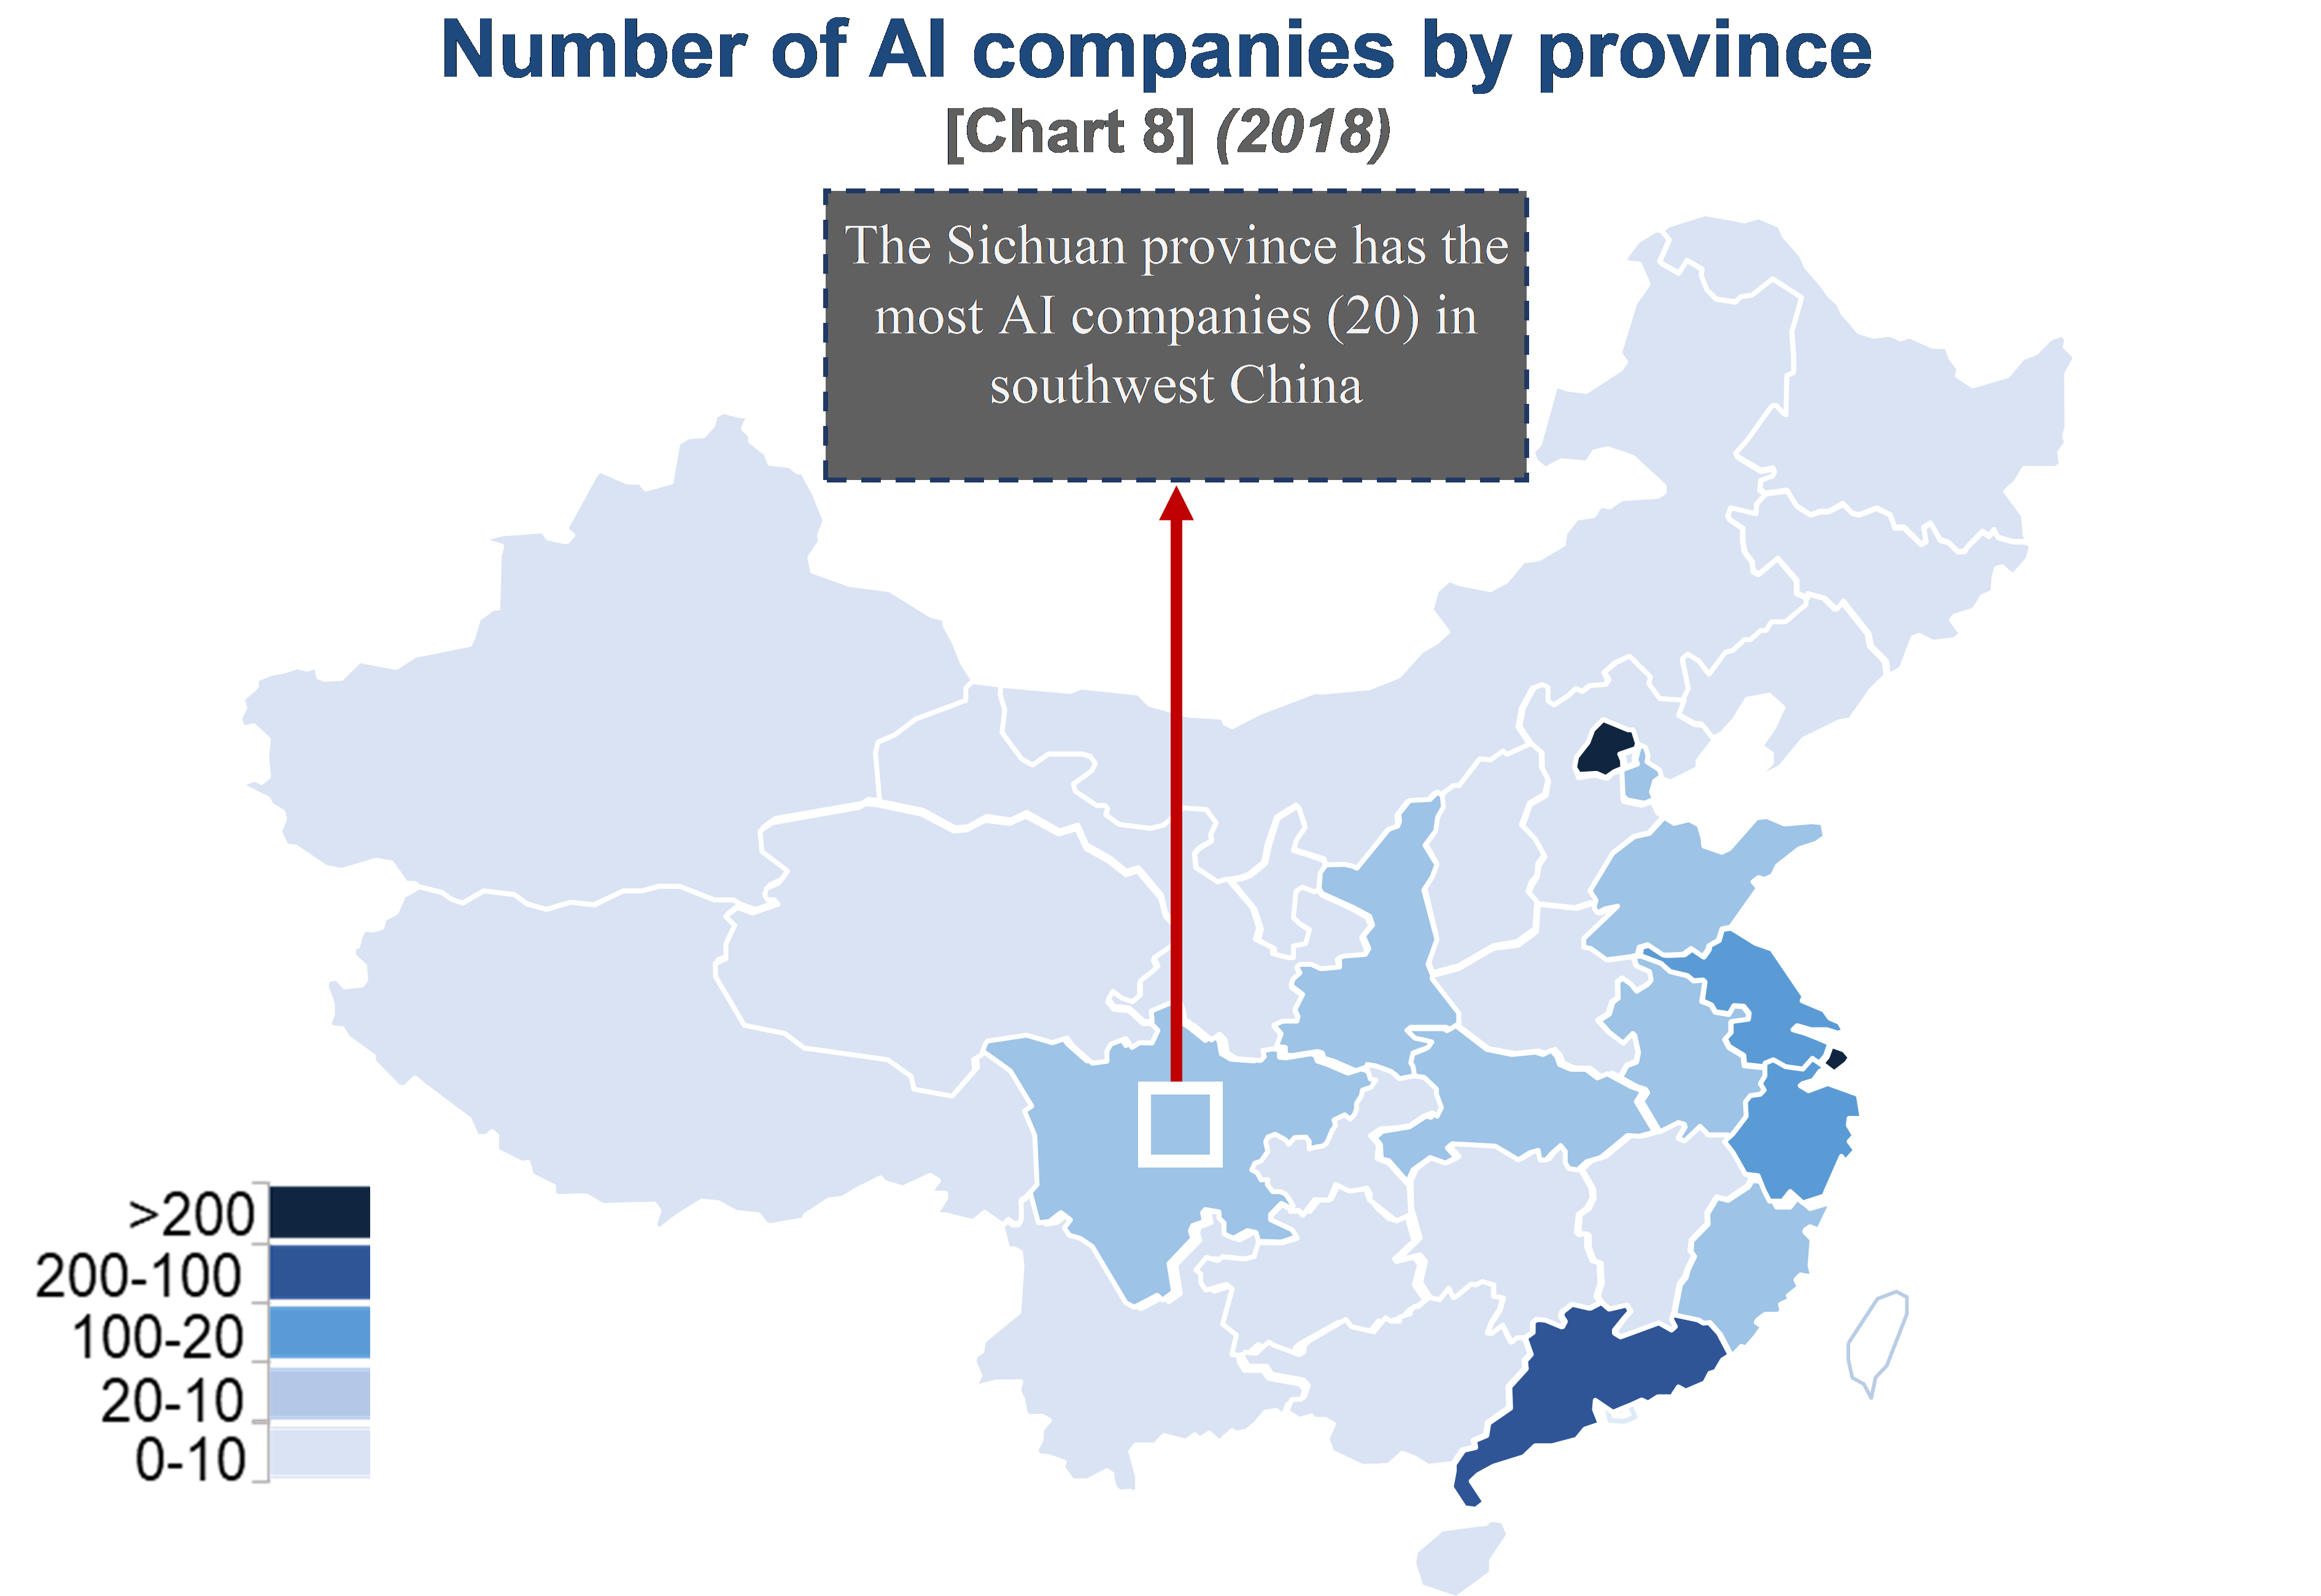 AI companies in China by province